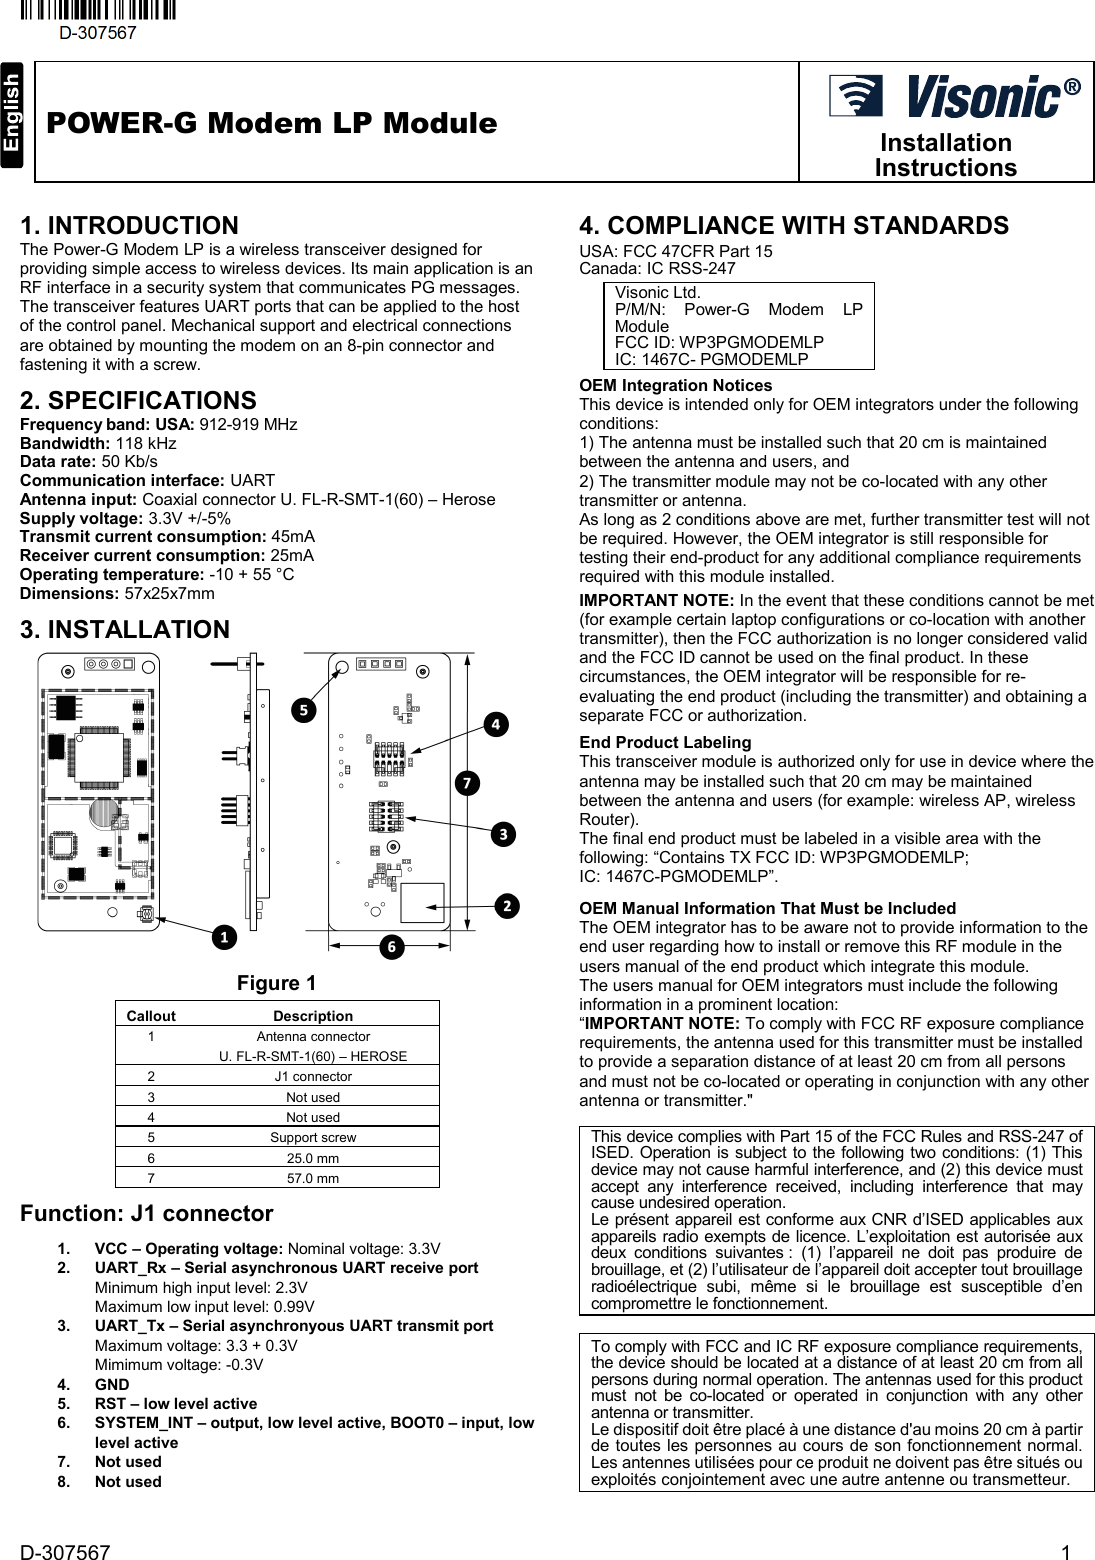    D-307567                    1  POWER-G Modem LP Module  Installation Instructions     1. INTRODUCTION The Power-G Modem LP is a wireless transceiver designed for providing simple access to wireless devices. Its main application is an RF interface in a security system that communicates PG messages.  The transceiver features UART ports that can be applied to the host of the control panel. Mechanical support and electrical connections are obtained by mounting the modem on an 8-pin connector and fastening it with a screw.  2. SPECIFICATIONS Frequency band: USA: 912-919 MHz Bandwidth: 118 kHz Data rate: 50 Kb/s Communication interface: UART  Antenna input: Coaxial connector U. FL-R-SMT-1(60) – Herose Supply voltage: 3.3V +/-5% Transmit current consumption: 45mA Receiver current consumption: 25mA Operating temperature: -10 + 55 °C Dimensions: 57x25x7mm 3. INSTALLATION Figure 1 Callout Description 1  Antenna connector U. FL-R-SMT-1(60) – HEROSE 2 J1 connector 3 Not used 4 Not used 5 Support screw 6 25.0 mm 7 57.0 mm Function: J1 connector 1. VCC – Operating voltage: Nominal voltage: 3.3V 2. UART_Rx – Serial asynchronous UART receive port Minimum high input level: 2.3V Maximum low input level: 0.99V 3. UART_Tx – Serial asynchronyous UART transmit port Maximum voltage: 3.3 + 0.3V Mimimum voltage: -0.3V 4. GND 5. RST – low level active 6. SYSTEM_INT – output, low level active, BOOT0 – input, low level active 7. Not used 8. Not used  4. COMPLIANCE WITH STANDARDS  USA: FCC 47CFR Part 15  Canada: IC RSS-247 Visonic Ltd. P/M/N: Power-G  Modem  LP Module FCC ID: WP3PGMODEMLP IC: 1467C- PGMODEMLP OEM Integration Notices This device is intended only for OEM integrators under the following conditions: 1) The antenna must be installed such that 20 cm is maintained between the antenna and users, and  2) The transmitter module may not be co-located with any other transmitter or antenna.  As long as 2 conditions above are met, further transmitter test will not be required. However, the OEM integrator is still responsible for testing their end-product for any additional compliance requirements required with this module installed. IMPORTANT NOTE: In the event that these conditions cannot be met (for example certain laptop configurations or co-location with another transmitter), then the FCC authorization is no longer considered valid and the FCC ID cannot be used on the final product. In these circumstances, the OEM integrator will be responsible for re-evaluating the end product (including the transmitter) and obtaining a separate FCC or authorization. End Product Labeling This transceiver module is authorized only for use in device where the antenna may be installed such that 20 cm may be maintained between the antenna and users (for example: wireless AP, wireless Router).  The final end product must be labeled in a visible area with the following: “Contains TX FCC ID: WP3PGMODEMLP;  IC: 1467C-PGMODEMLP”.  OEM Manual Information That Must be Included The OEM integrator has to be aware not to provide information to the end user regarding how to install or remove this RF module in the users manual of the end product which integrate this module.  The users manual for OEM integrators must include the following information in a prominent location: “IMPORTANT NOTE: To comply with FCC RF exposure compliance requirements, the antenna used for this transmitter must be installed to provide a separation distance of at least 20 cm from all persons and must not be co-located or operating in conjunction with any other antenna or transmitter.&quot;  To comply with FCC and IC RF exposure compliance requirements, the device should be located at a distance of at least 20 cm from all persons during normal operation. The antennas used for this product must not be co-located or operated in conjunction with any other antenna or transmitter. Le dispositif doit être placé à une distance d&apos;au moins 20 cm à partir de toutes les personnes au cours de son fonctionnement normal. Les antennes utilisées pour ce produit ne doivent pas être situés ou exploités conjointement avec une autre antenne ou transmetteur. This device complies with Part 15 of the FCC Rules and RSS-247 of ISED. Operation is subject to the following two conditions: (1) This device may not cause harmful interference, and (2) this device must accept any interference received, including interference that may cause undesired operation. Le présent appareil est conforme aux CNR d’ISED applicables aux appareils radio exempts de licence. L’exploitation est autorisée aux deux conditions suivantes : (1) l’appareil ne doit pas produire de brouillage, et (2) l’utilisateur de l’appareil doit accepter tout brouillage radioélectrique subi, même si le brouillage est susceptible d’en compromettre le fonctionnement. 